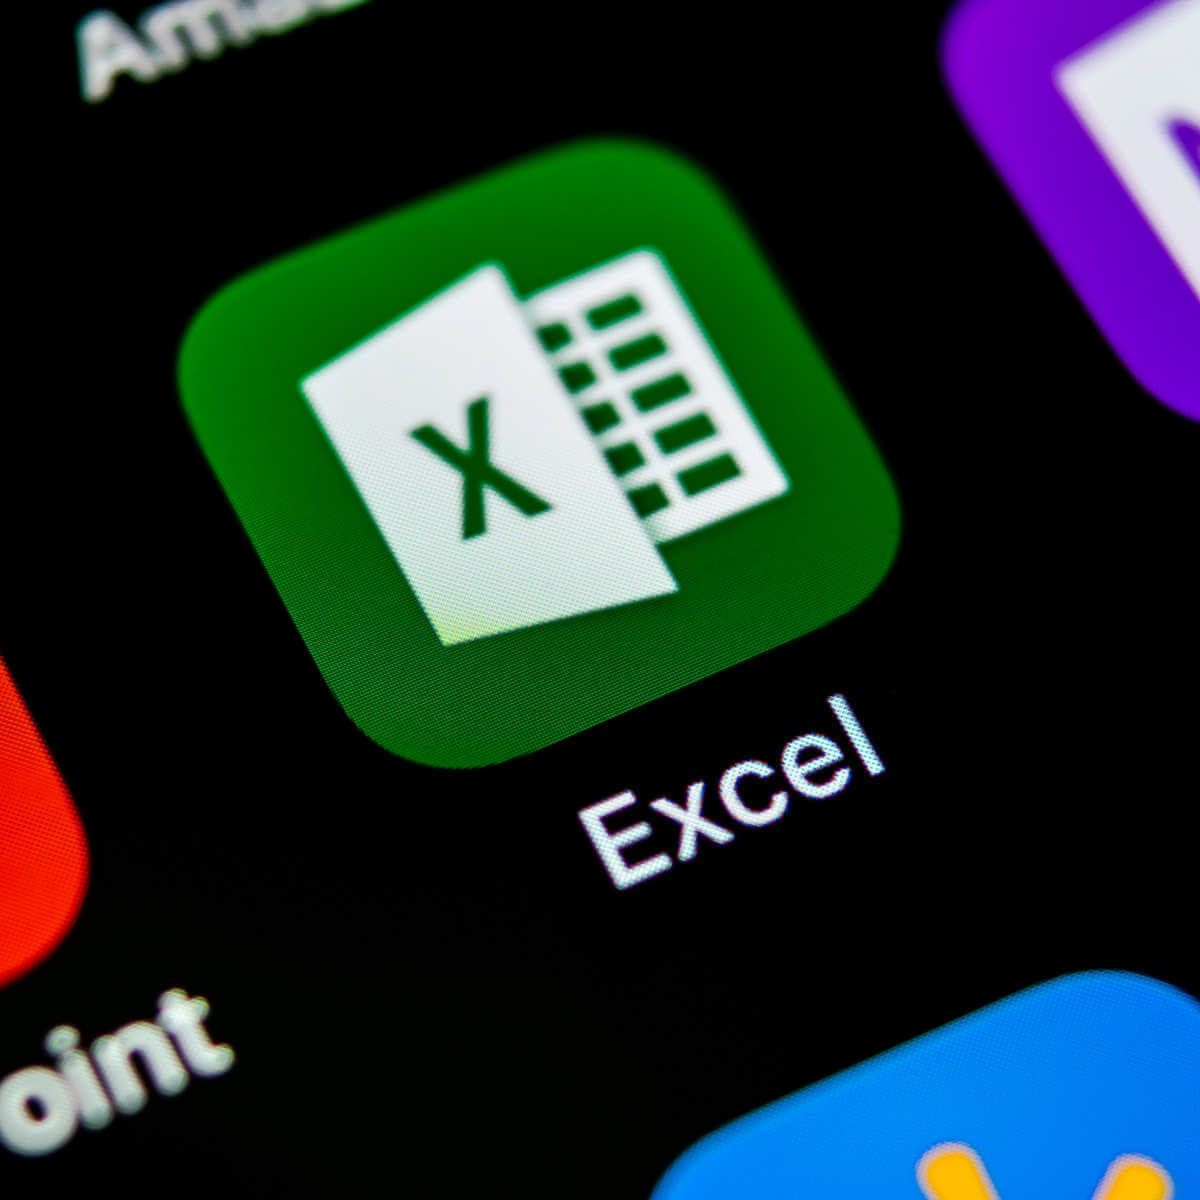 Excel new data types include food, movies, etc